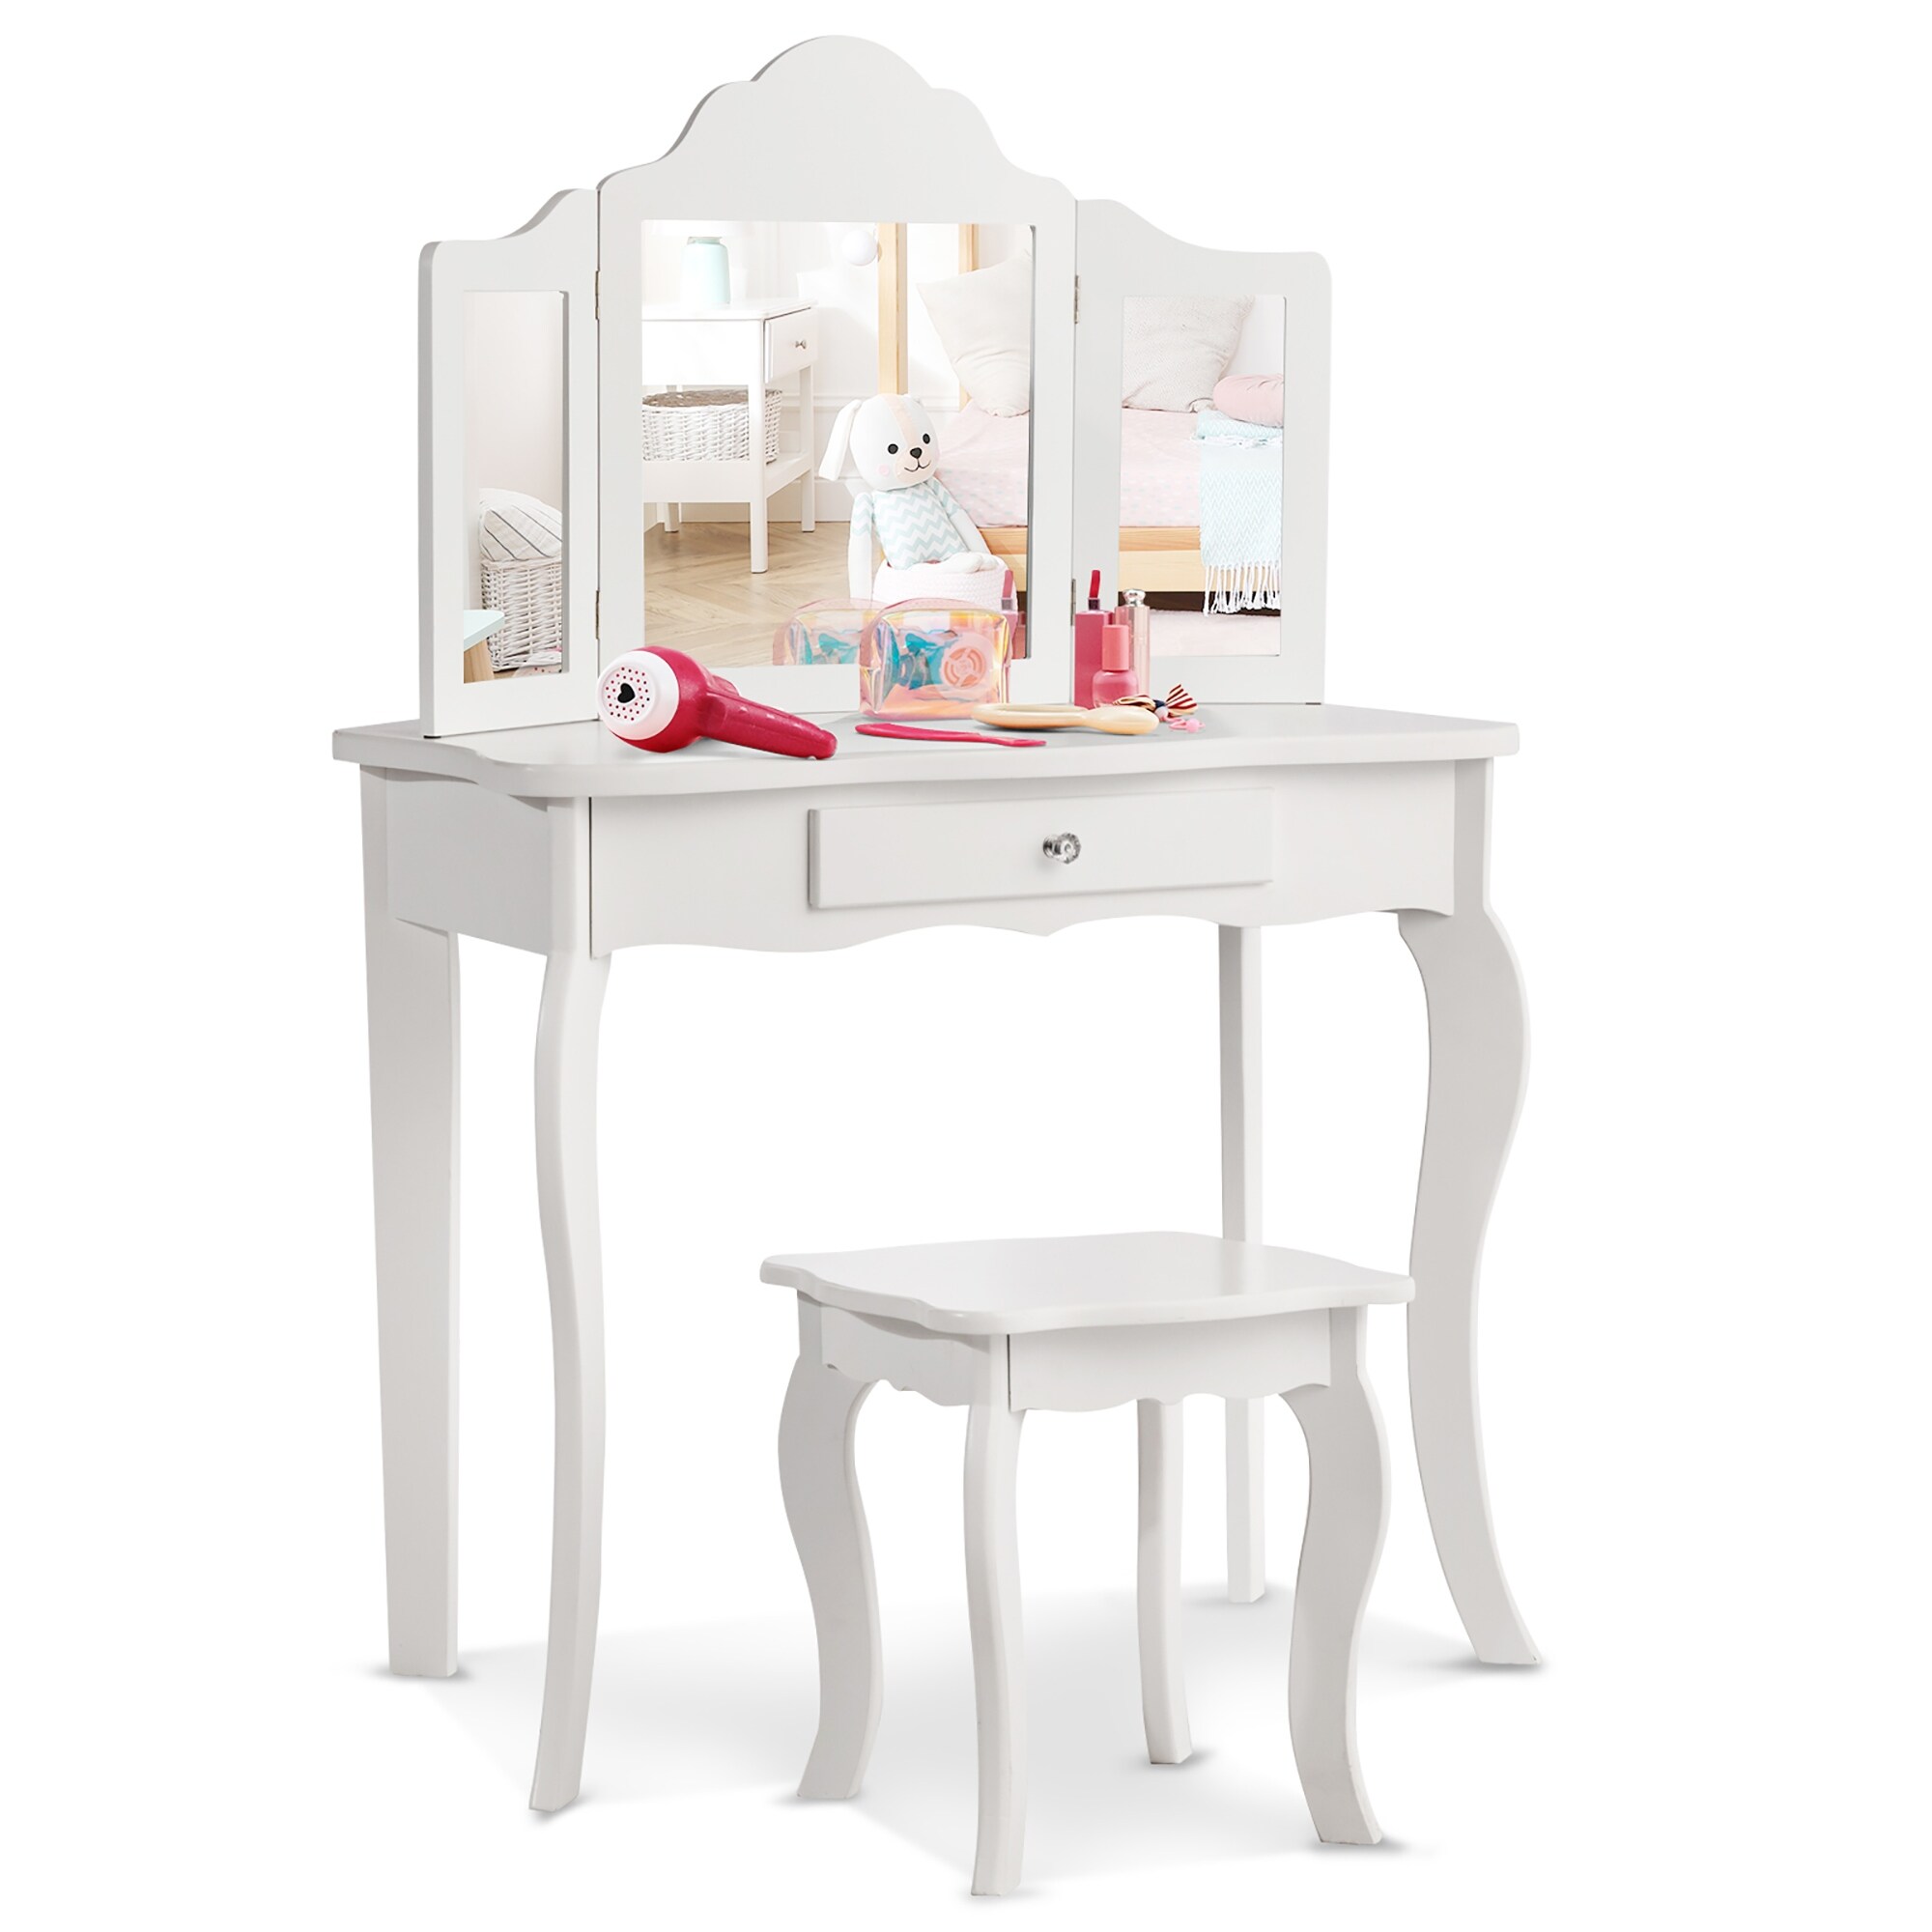 https://ak1.ostkcdn.com/images/products/is/images/direct/d5bcc5603a2ccb91567b8278ff3d77dee24d9f39/Costway-Vanity-Table-Set-Makeup-Dressing-Table-Stool-Mirror-White.jpg